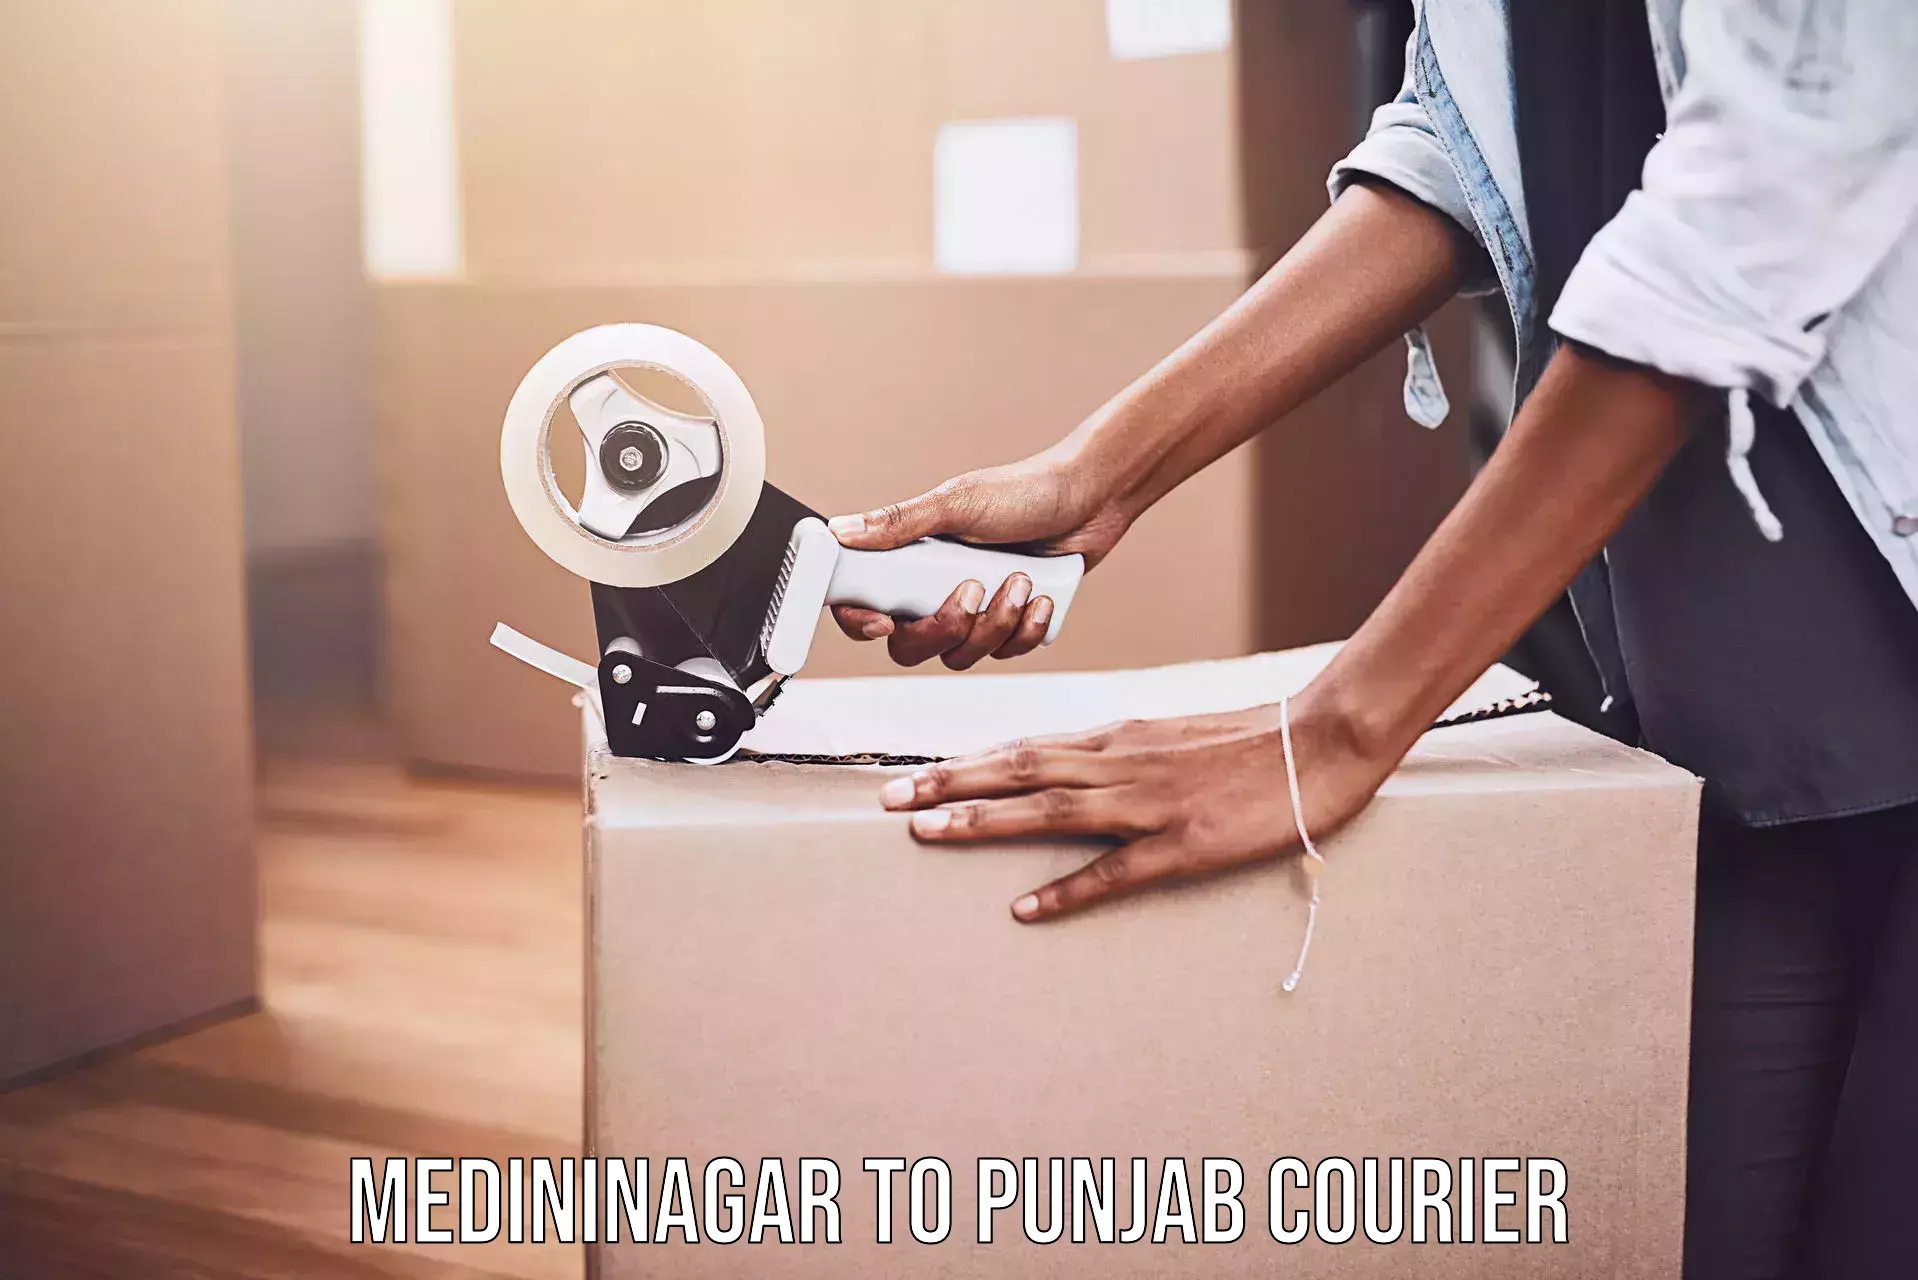 Sustainable courier practices Medininagar to Punjab